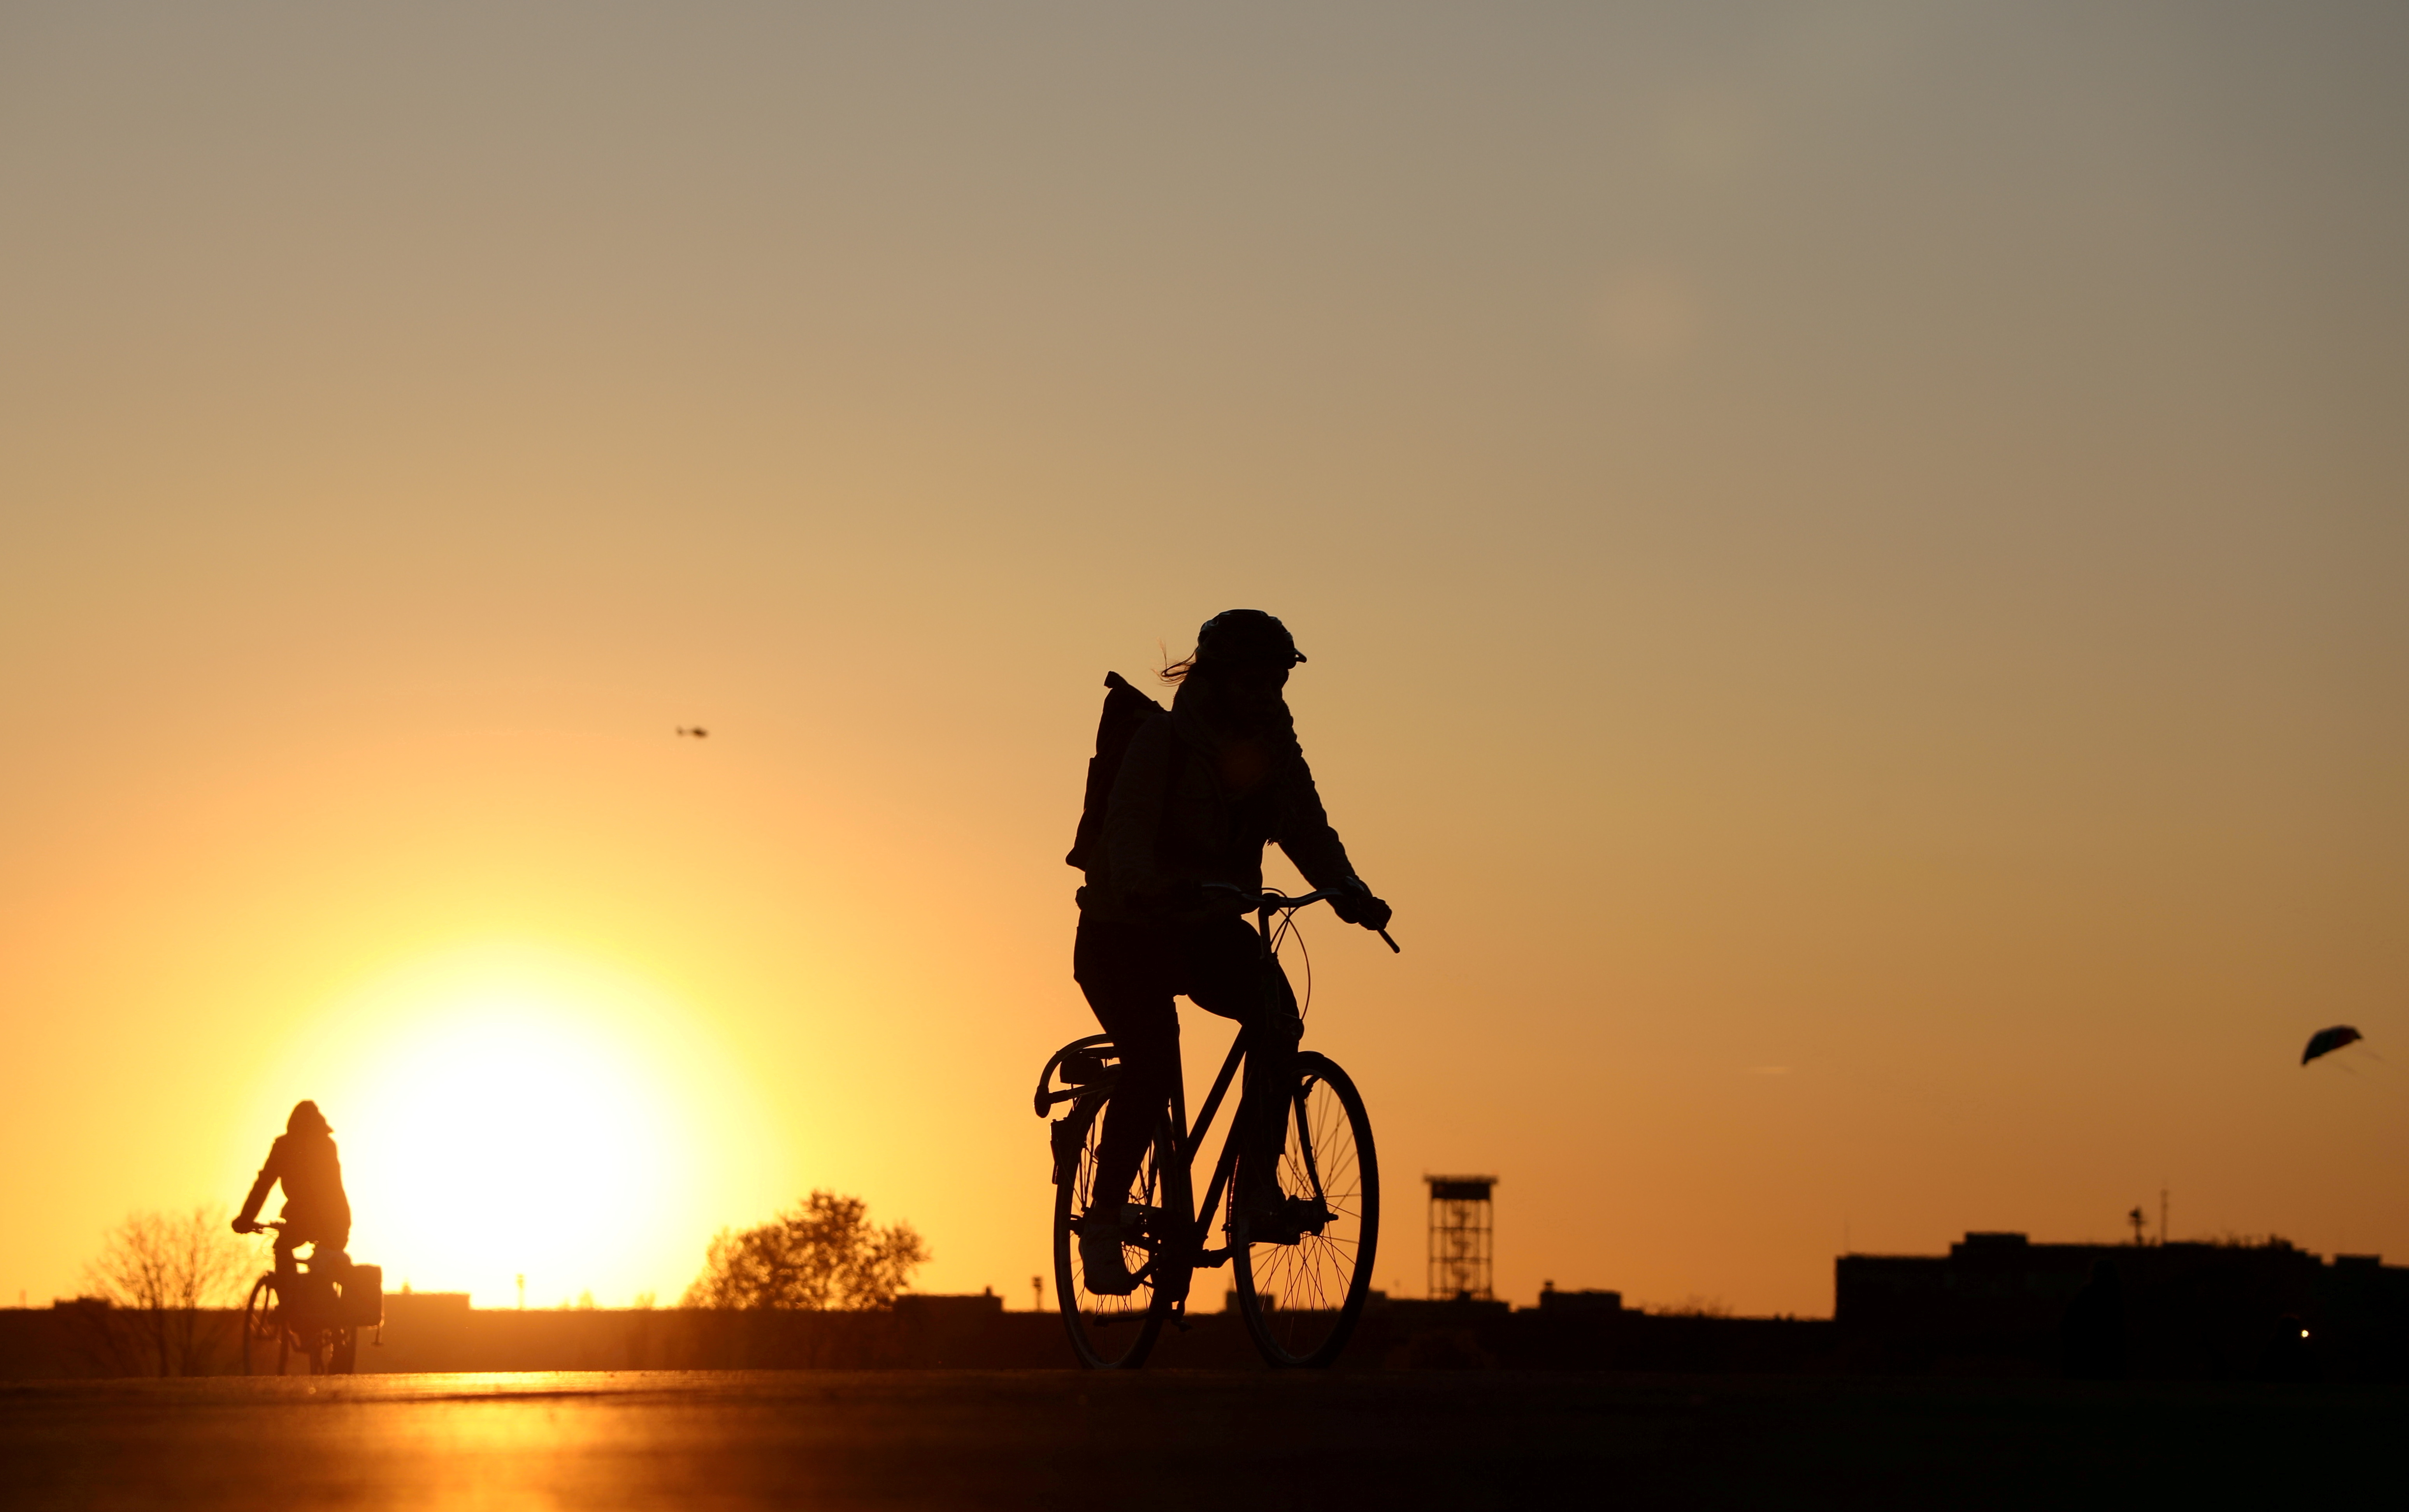 People on bikes enjoy the sunset at the Tempelhofer Feld, as the spread of coronavirus disease (COVID-19) continues in Berlin, Germany, April 19, 2020. REUTERS/Christian Mang/File Photo